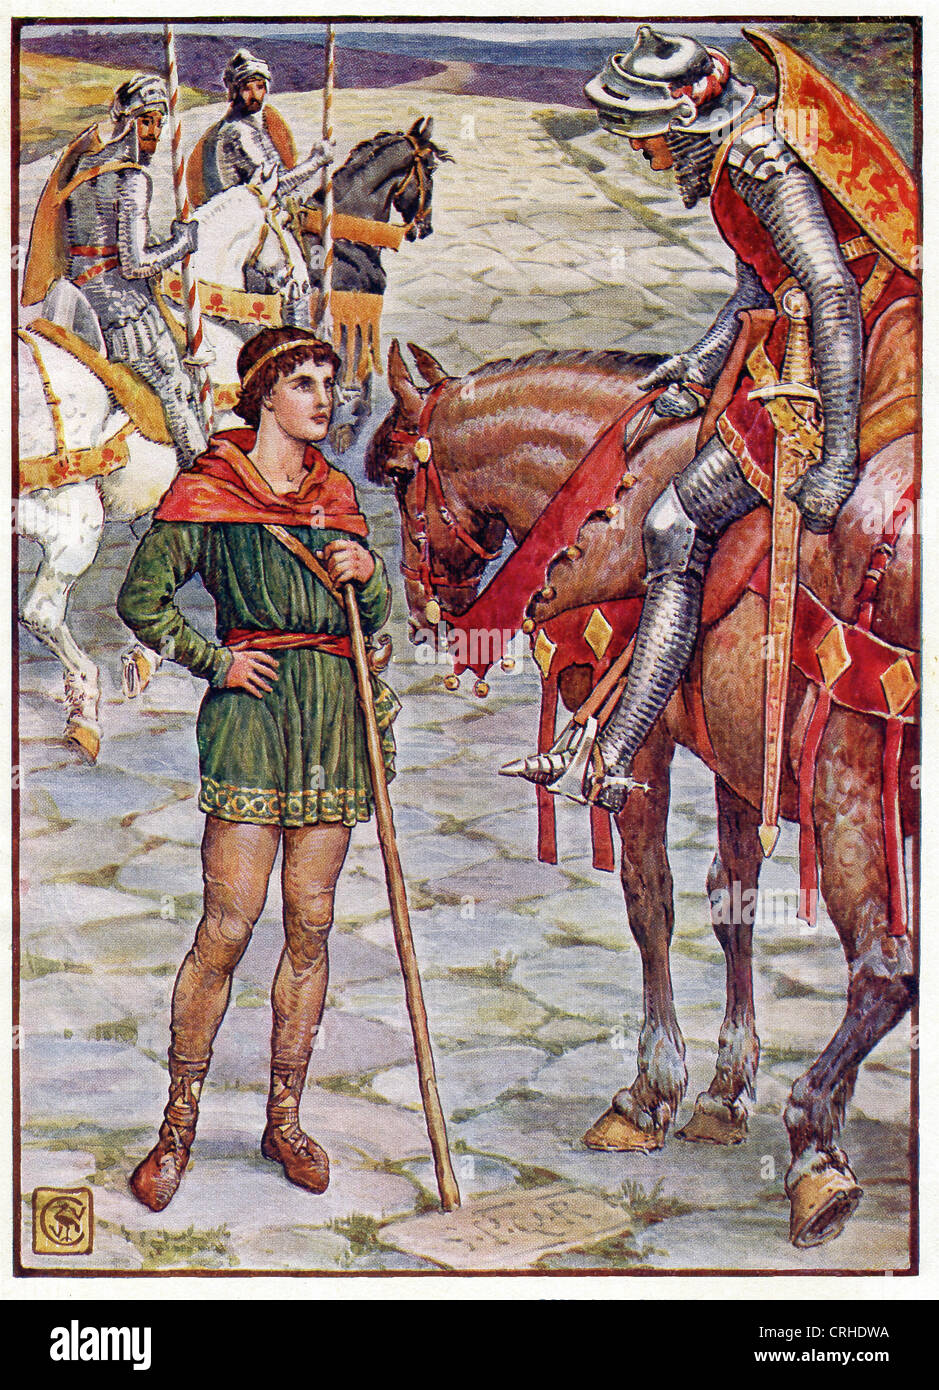 Percival, a knight of King Arthur's Round Table, questions Sir Owen. Stock Photo